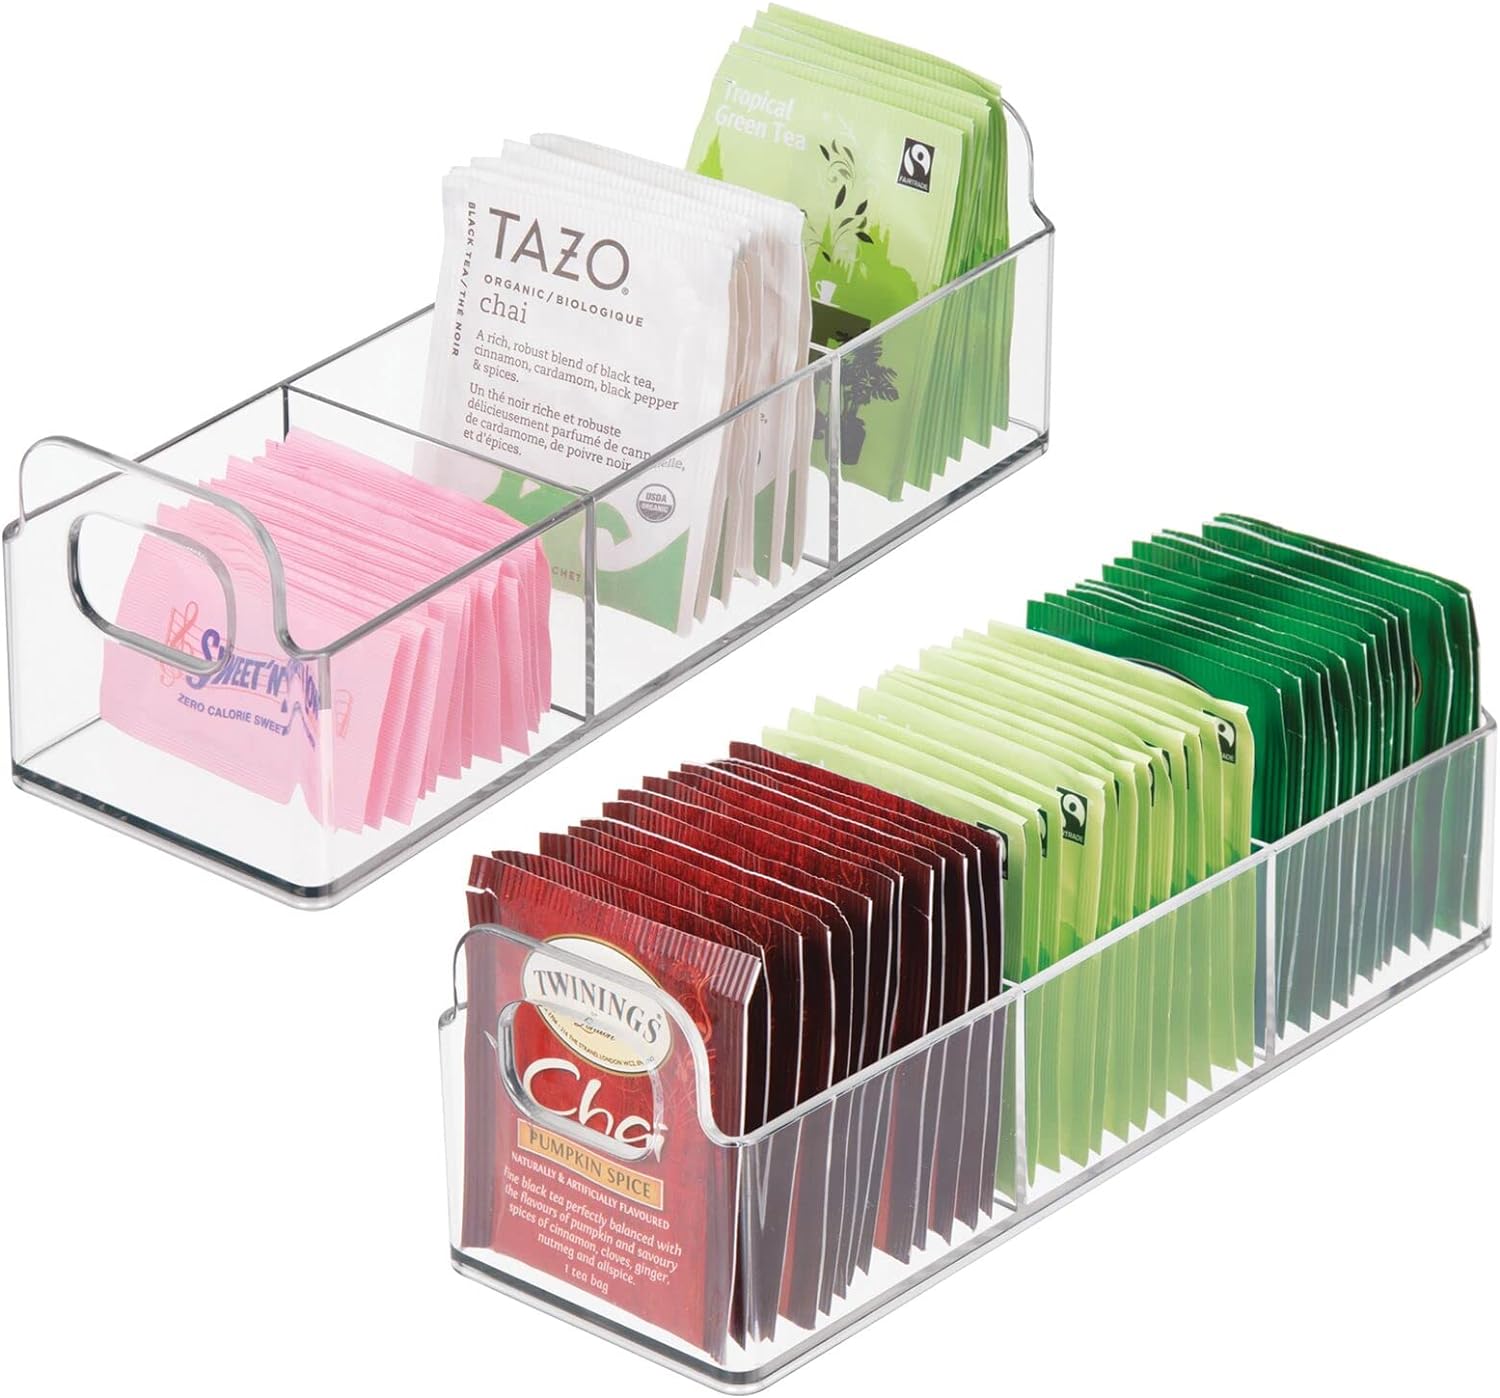 mDesign Plastic Condiment Organizer and Tea Bag Holder - 9 Long Kitchen Pantry/Countertop Storage Caddy - Divided Chip, Snack, Granola, Oatmeal Packet Holder - Lumiere Collection - 2 Pack - Clear